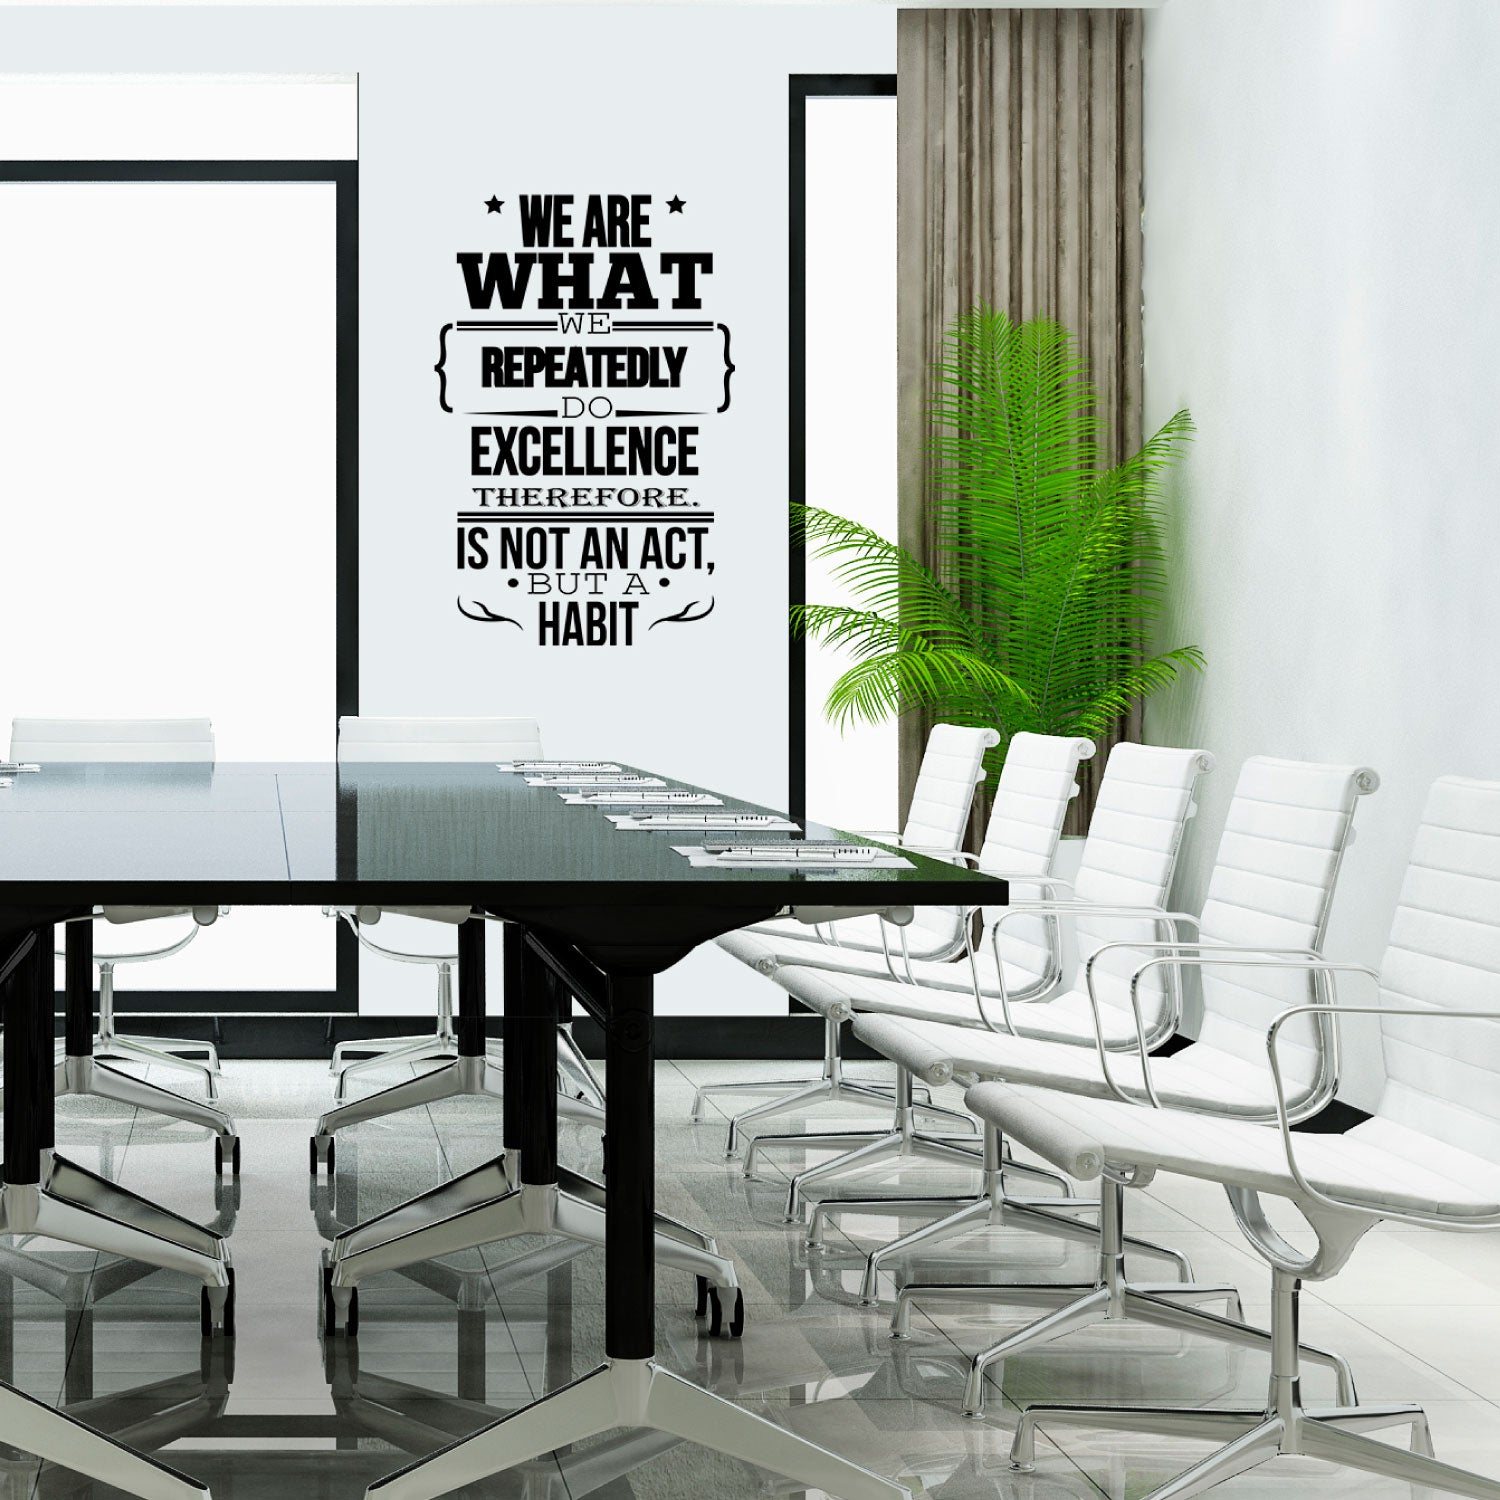 VINIL DECORATIVO WE ARE WHAT WE REPEATEDLY DO EXCELLENCE THEREFORE IS NOT A ACT, BUT A HABIT 60 X 90 CM